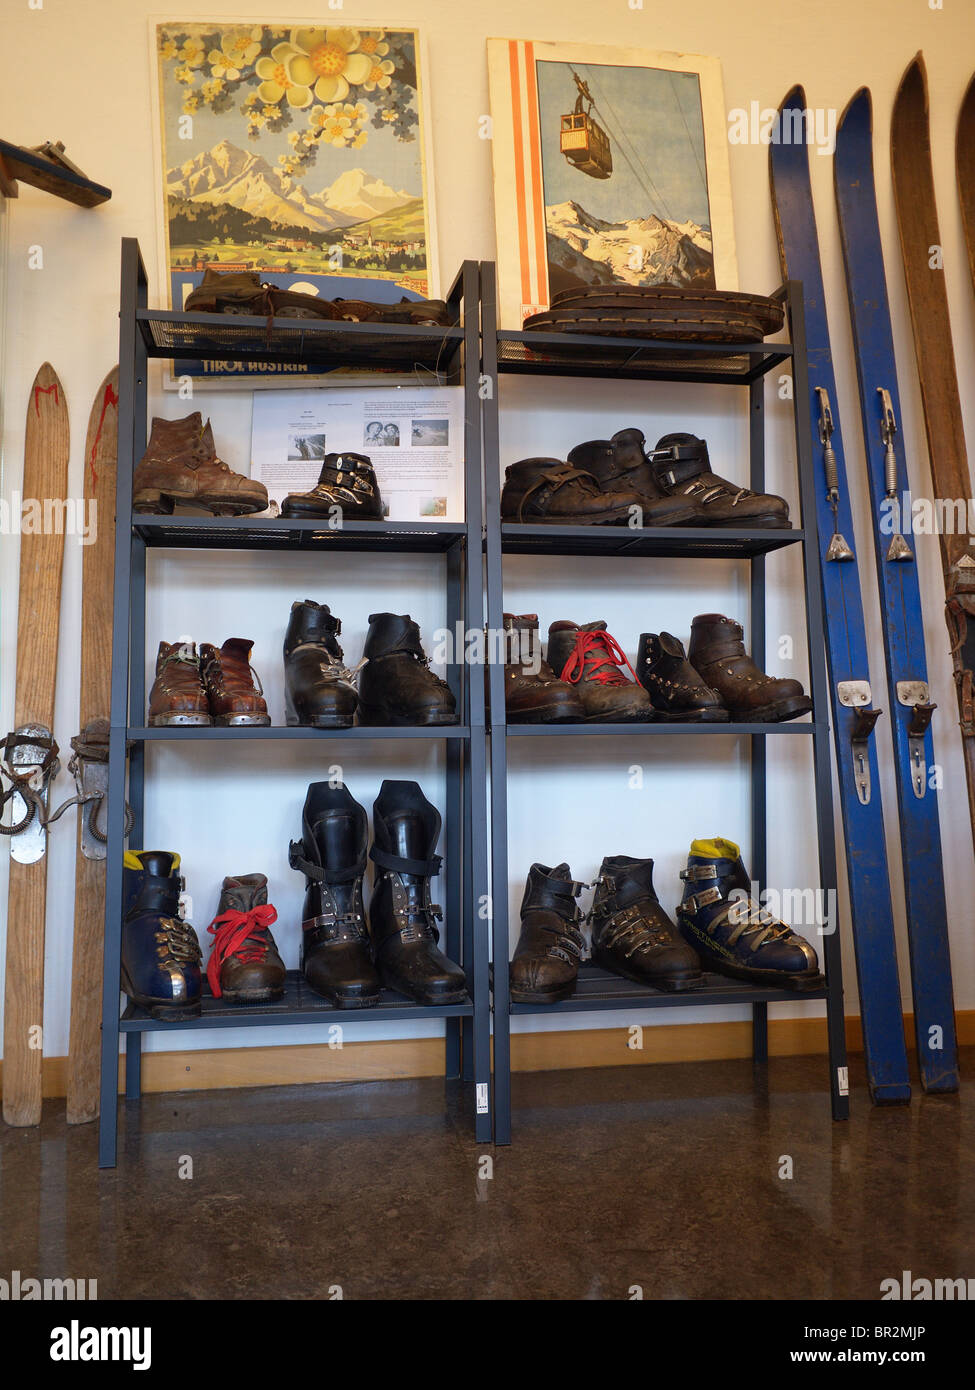 Display of old fashioned skis and boots at the museum in the Ski resort of Igls near Innsbruck Austria Stock Photo